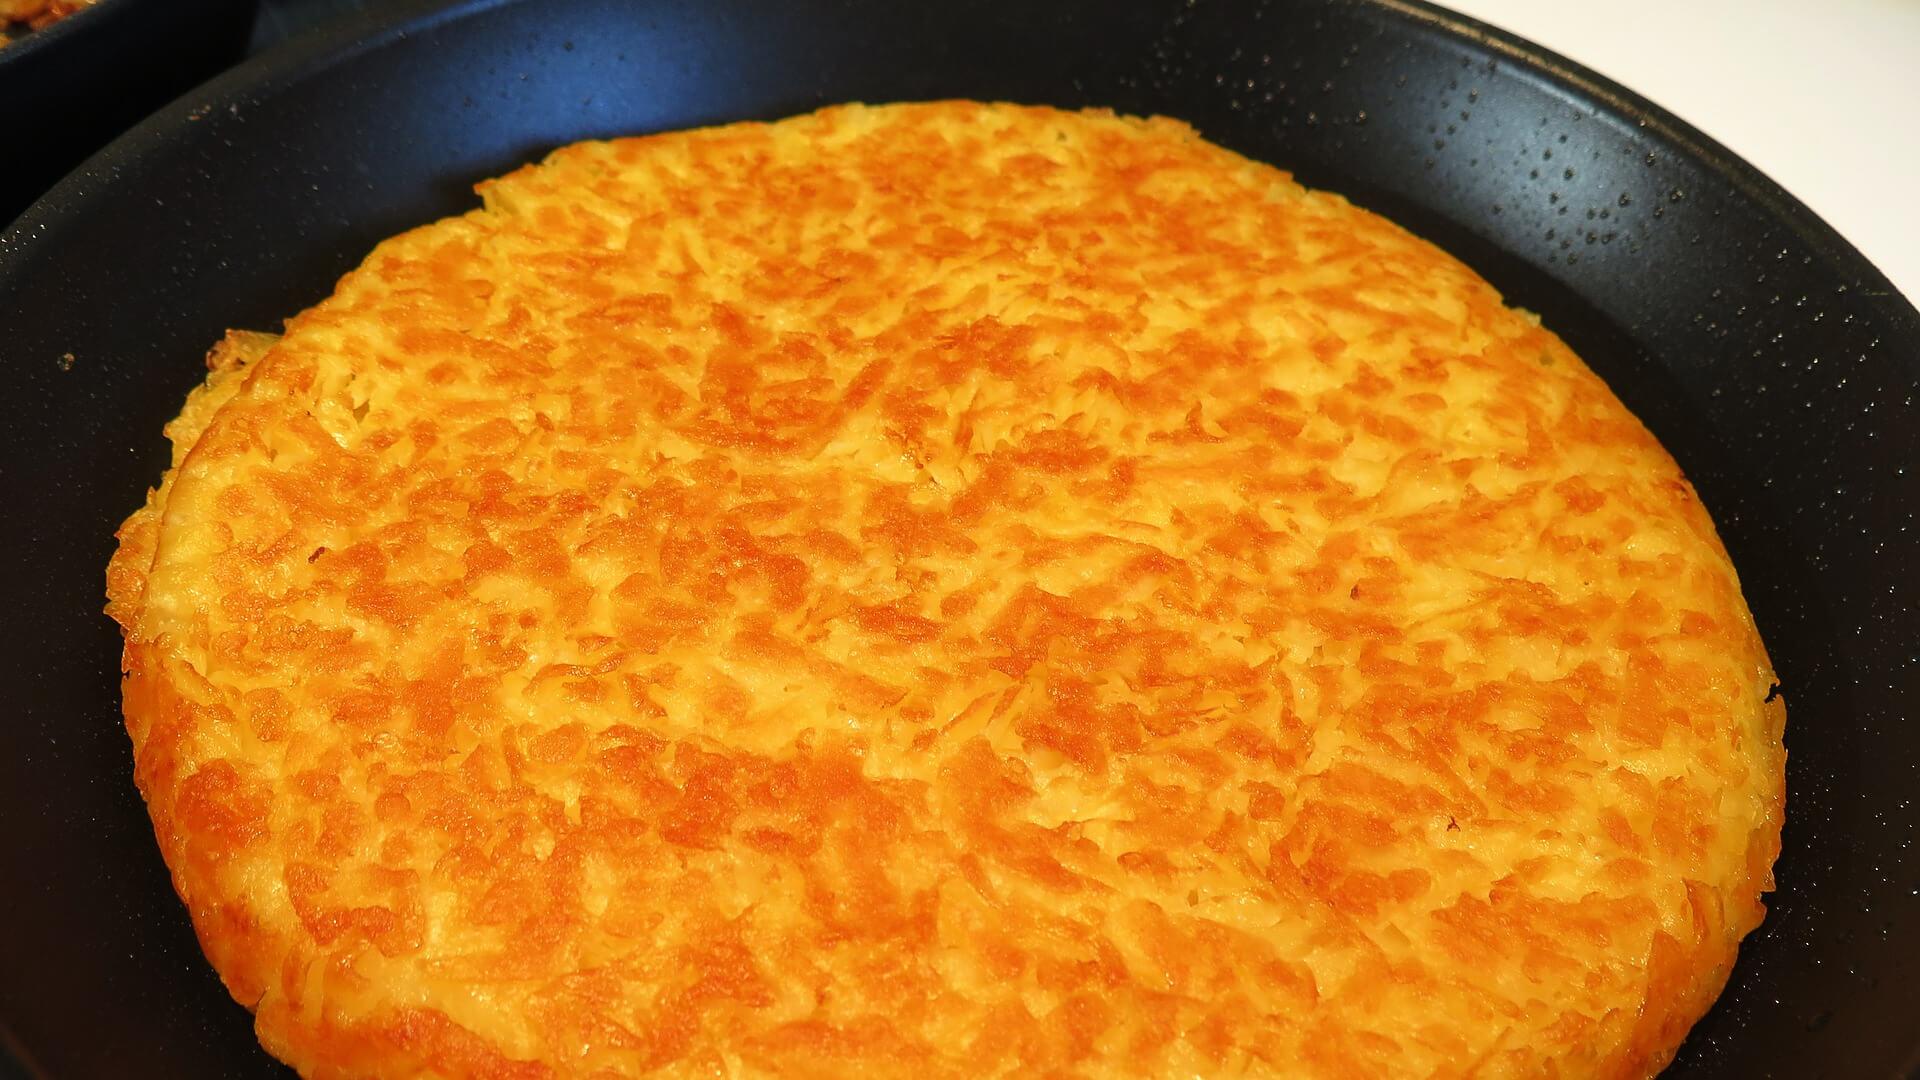 Traditional food in Switzerland, Rosti, is very popular among locals